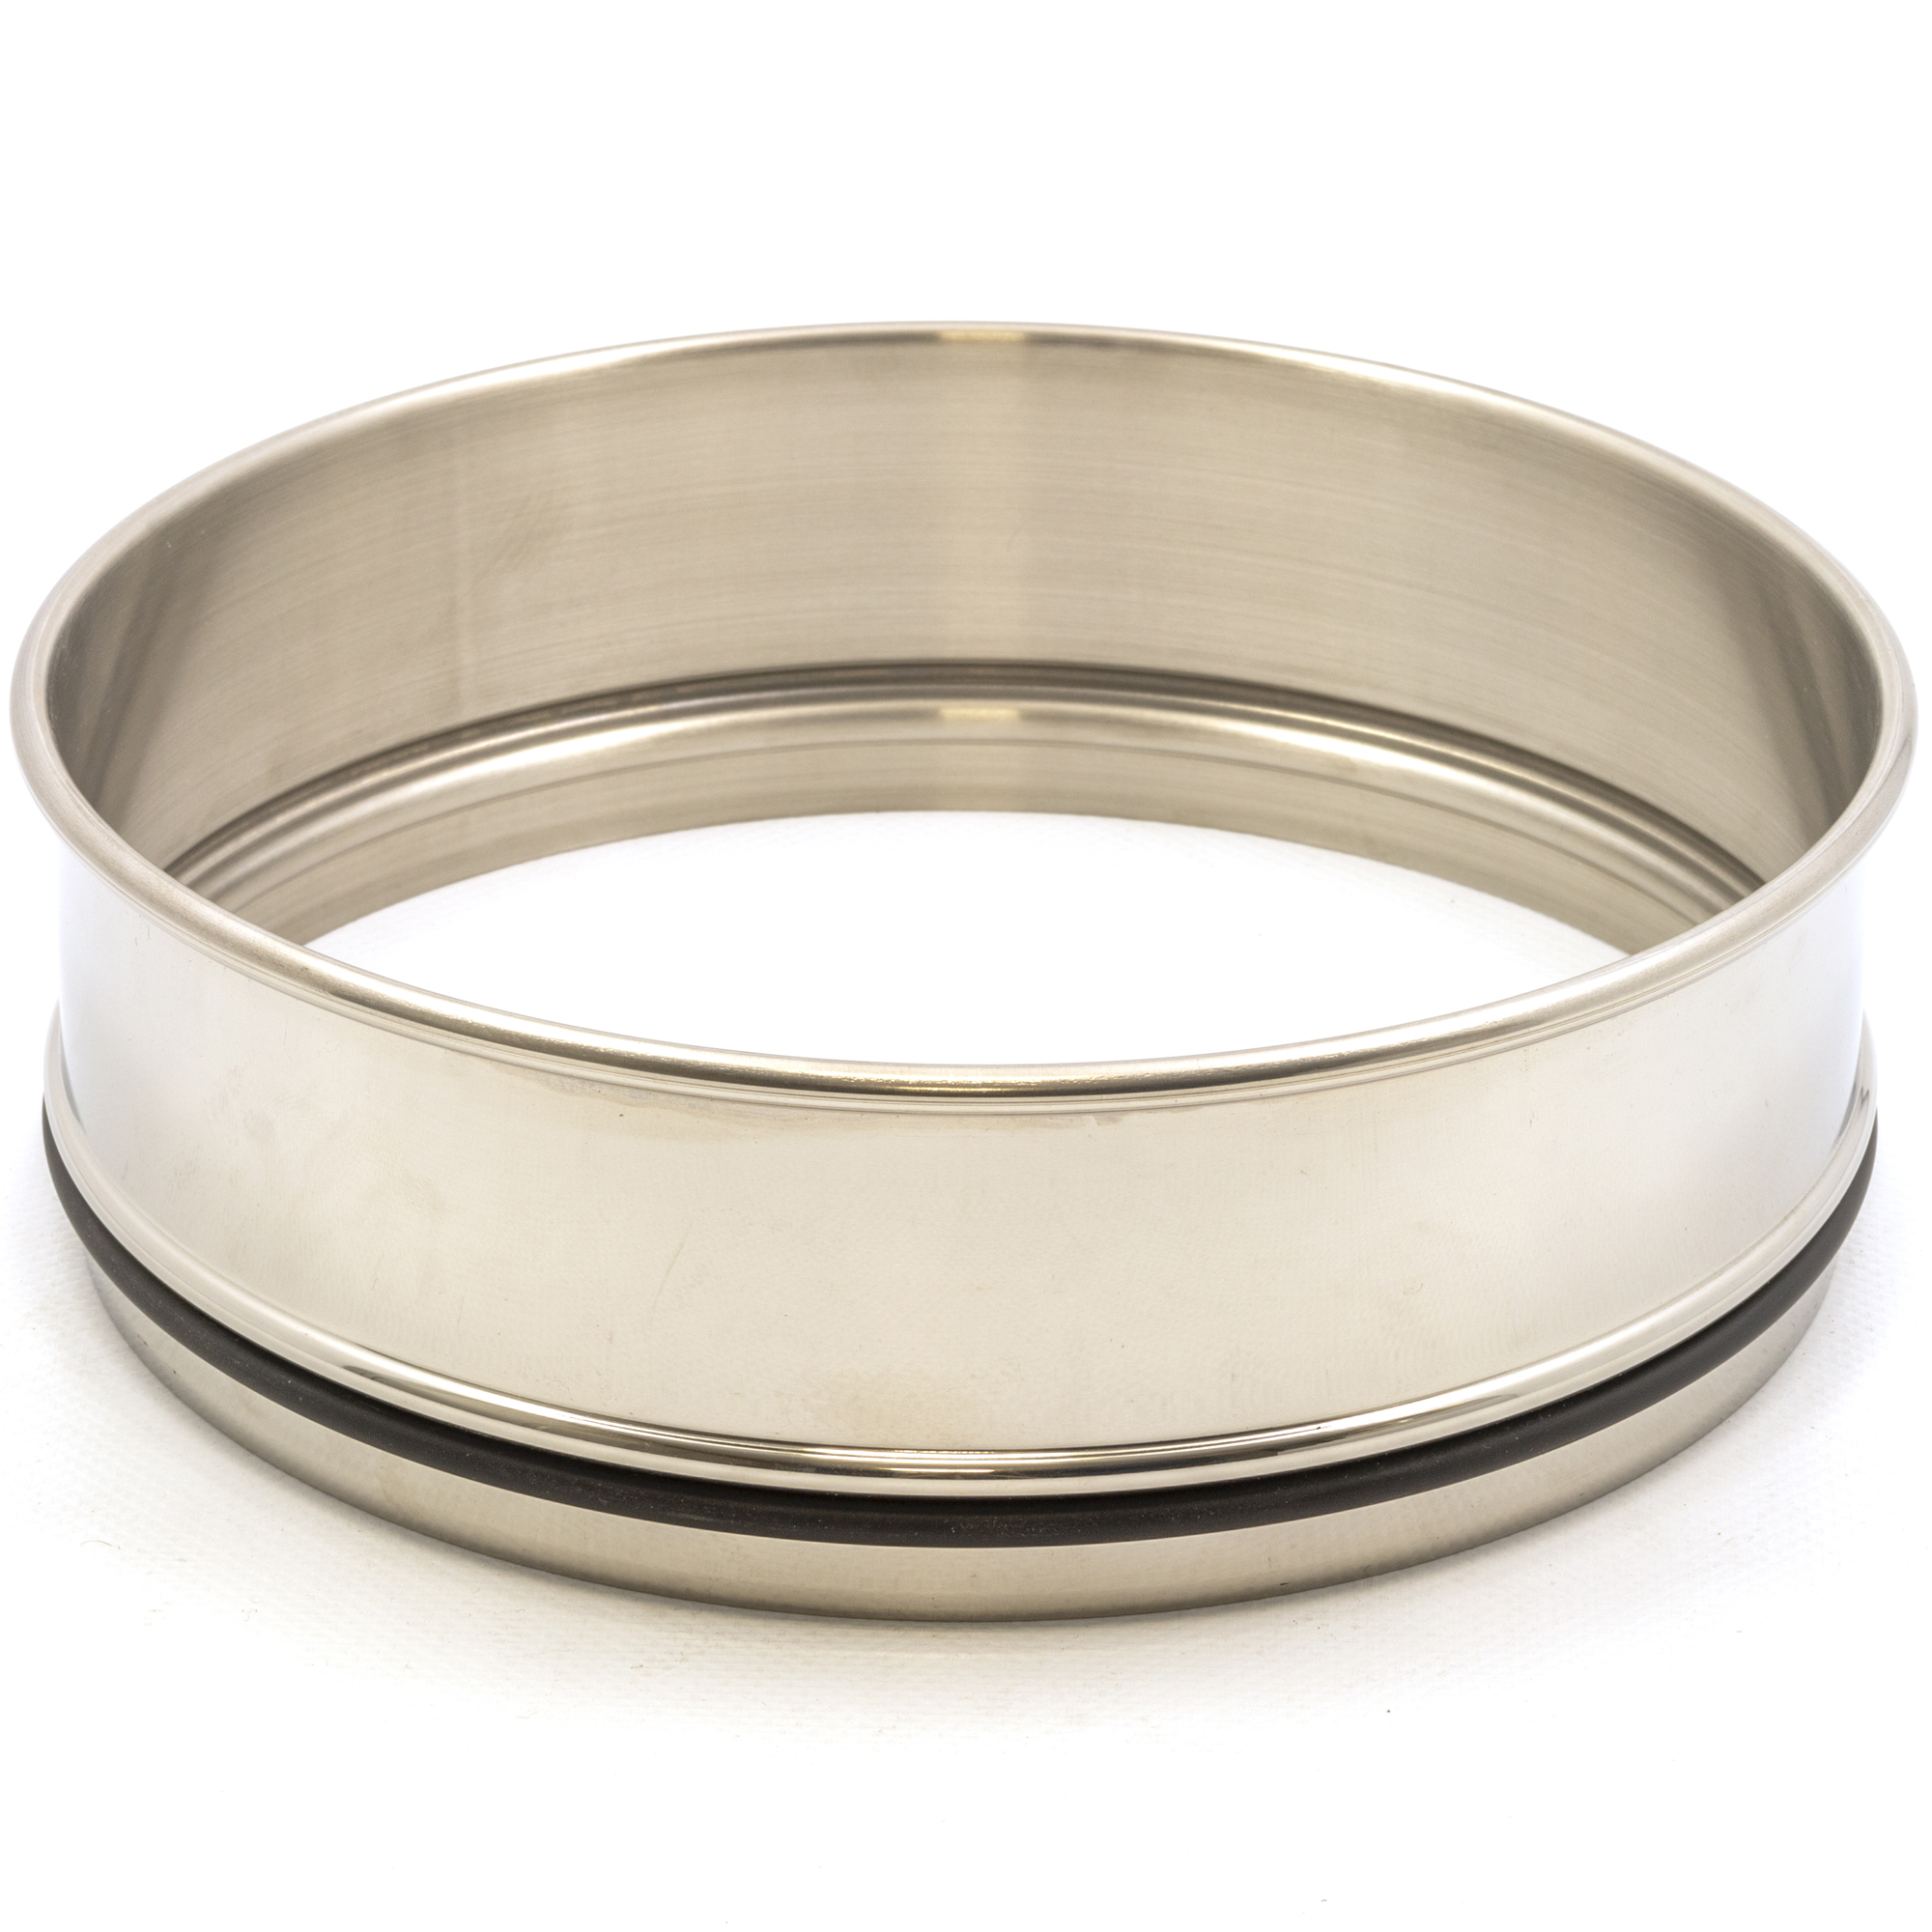 HAVE 205923944 Intermediate ring for 350x60mm sieves